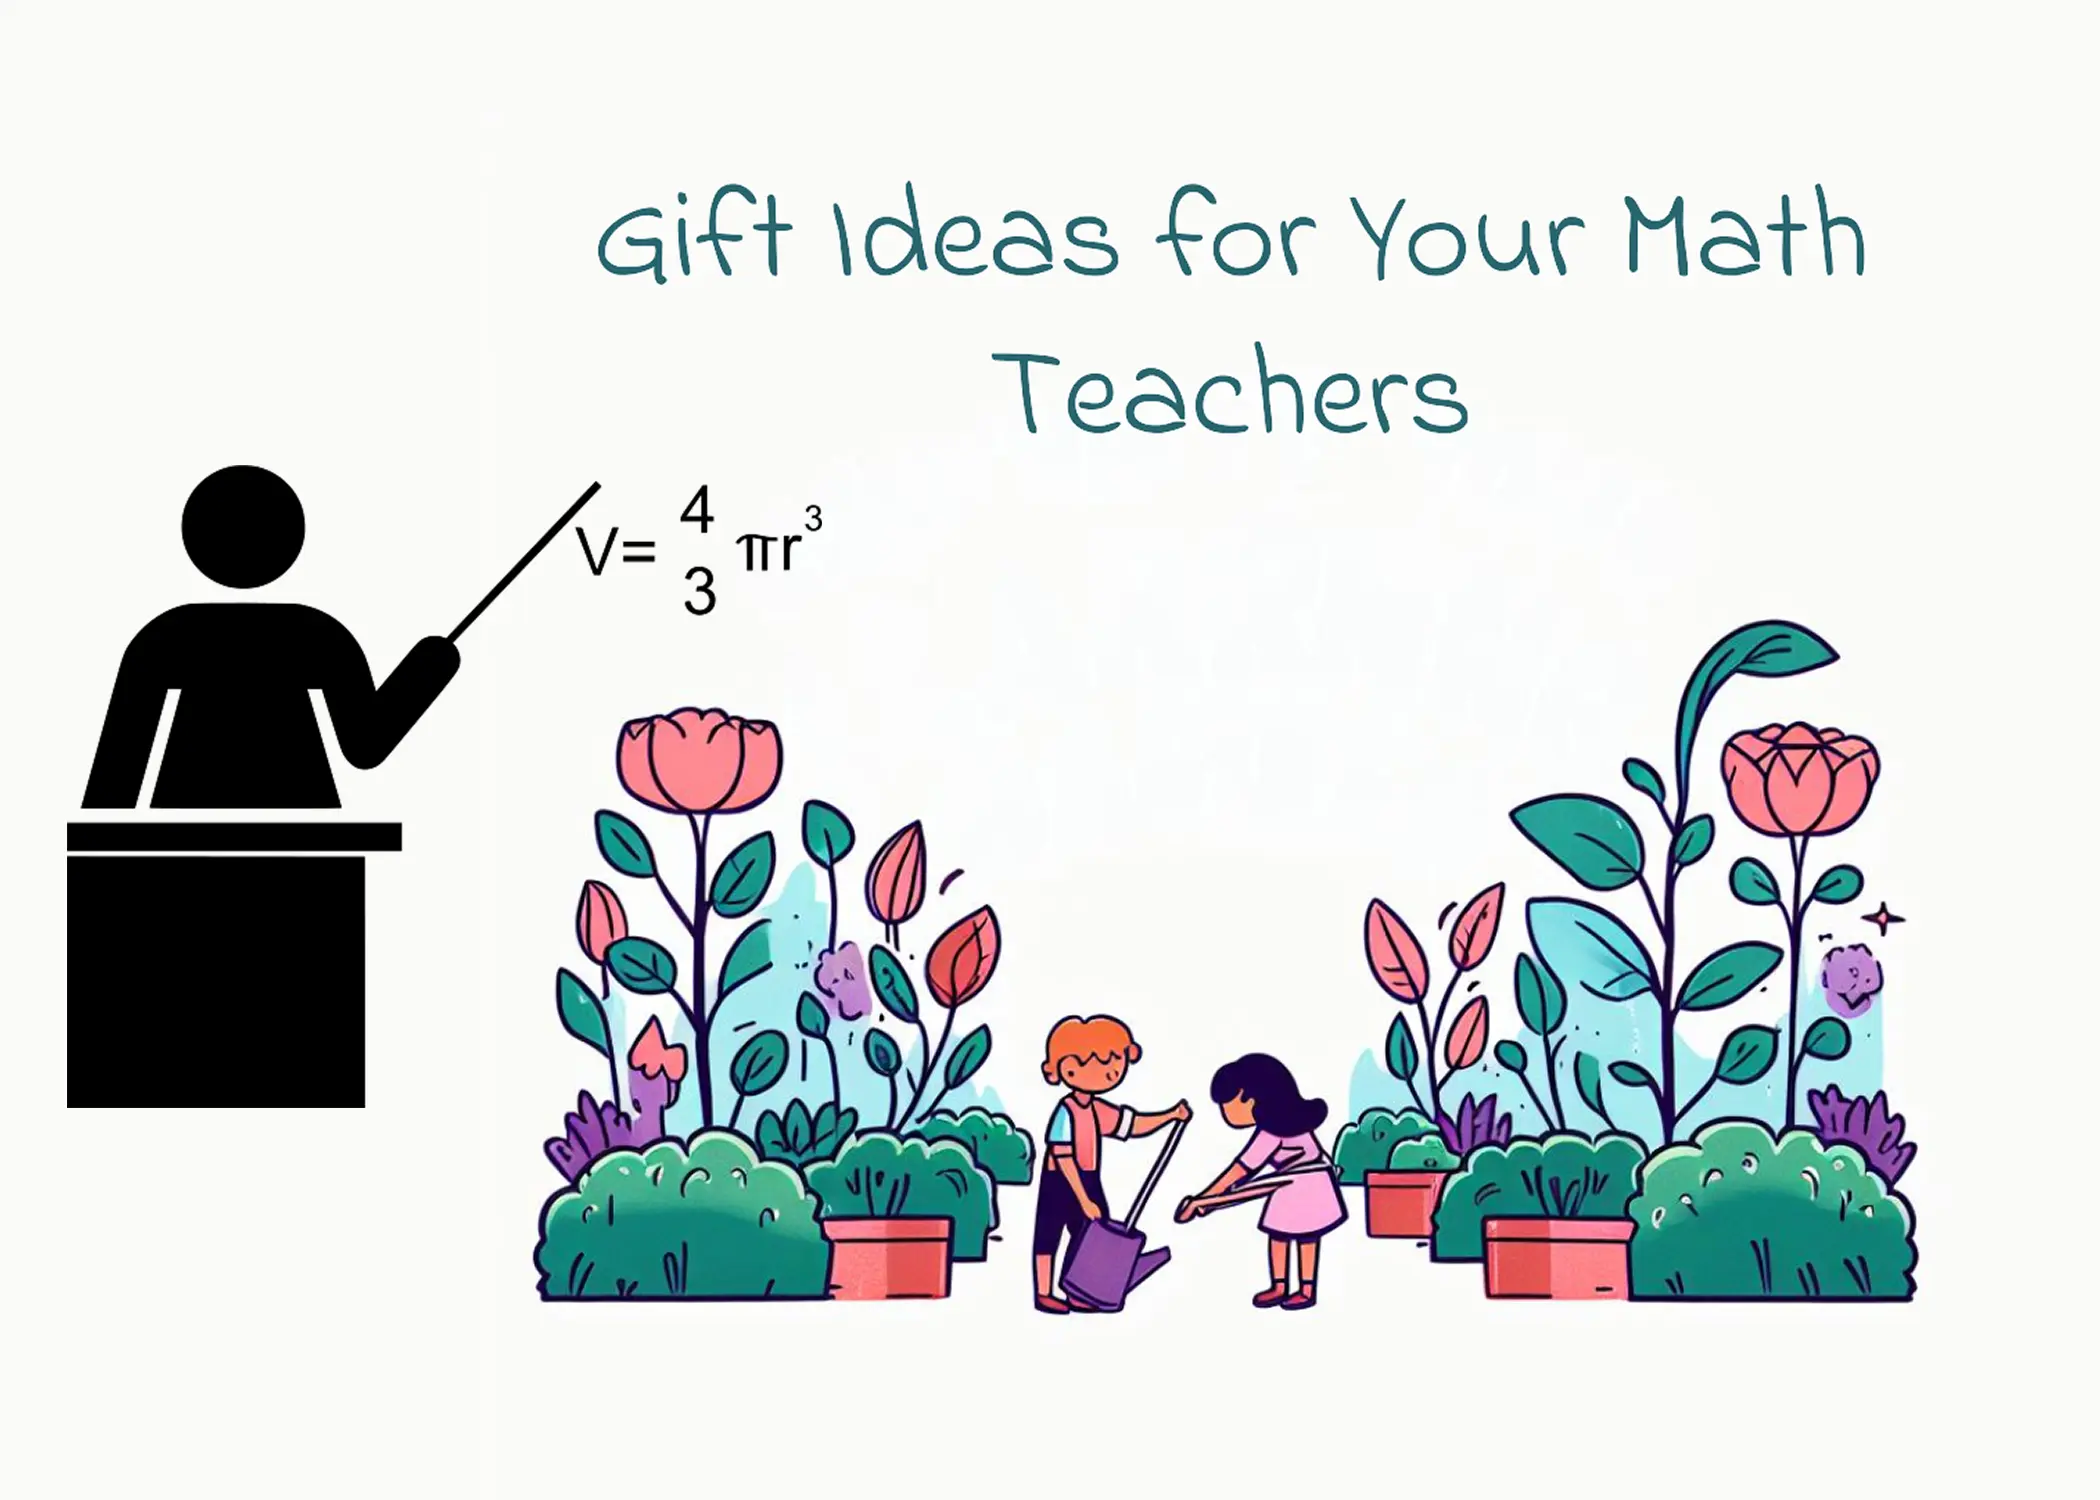 25 Gift Ideas for Your Math Teacher in Primary School